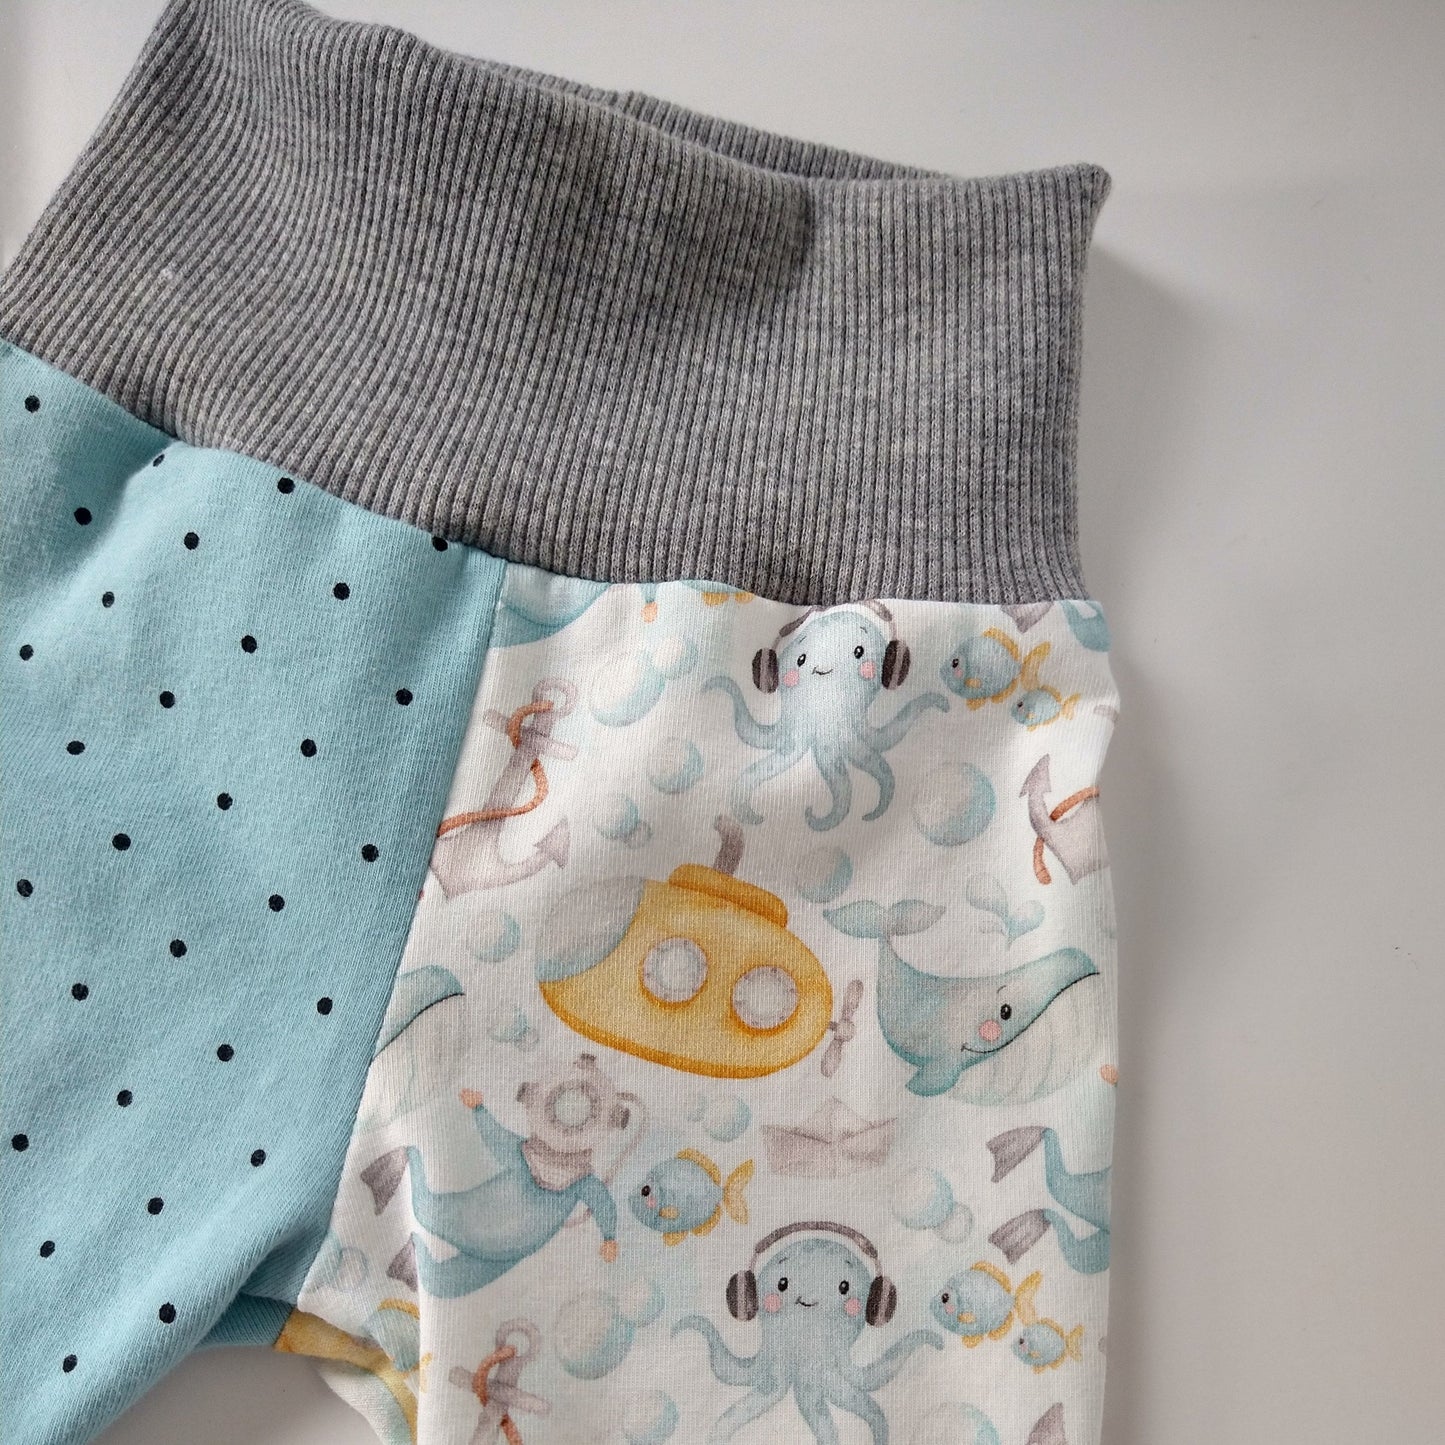 Baby leggings, size EUR 62 cm / US 2-4 months, underwater mix and match